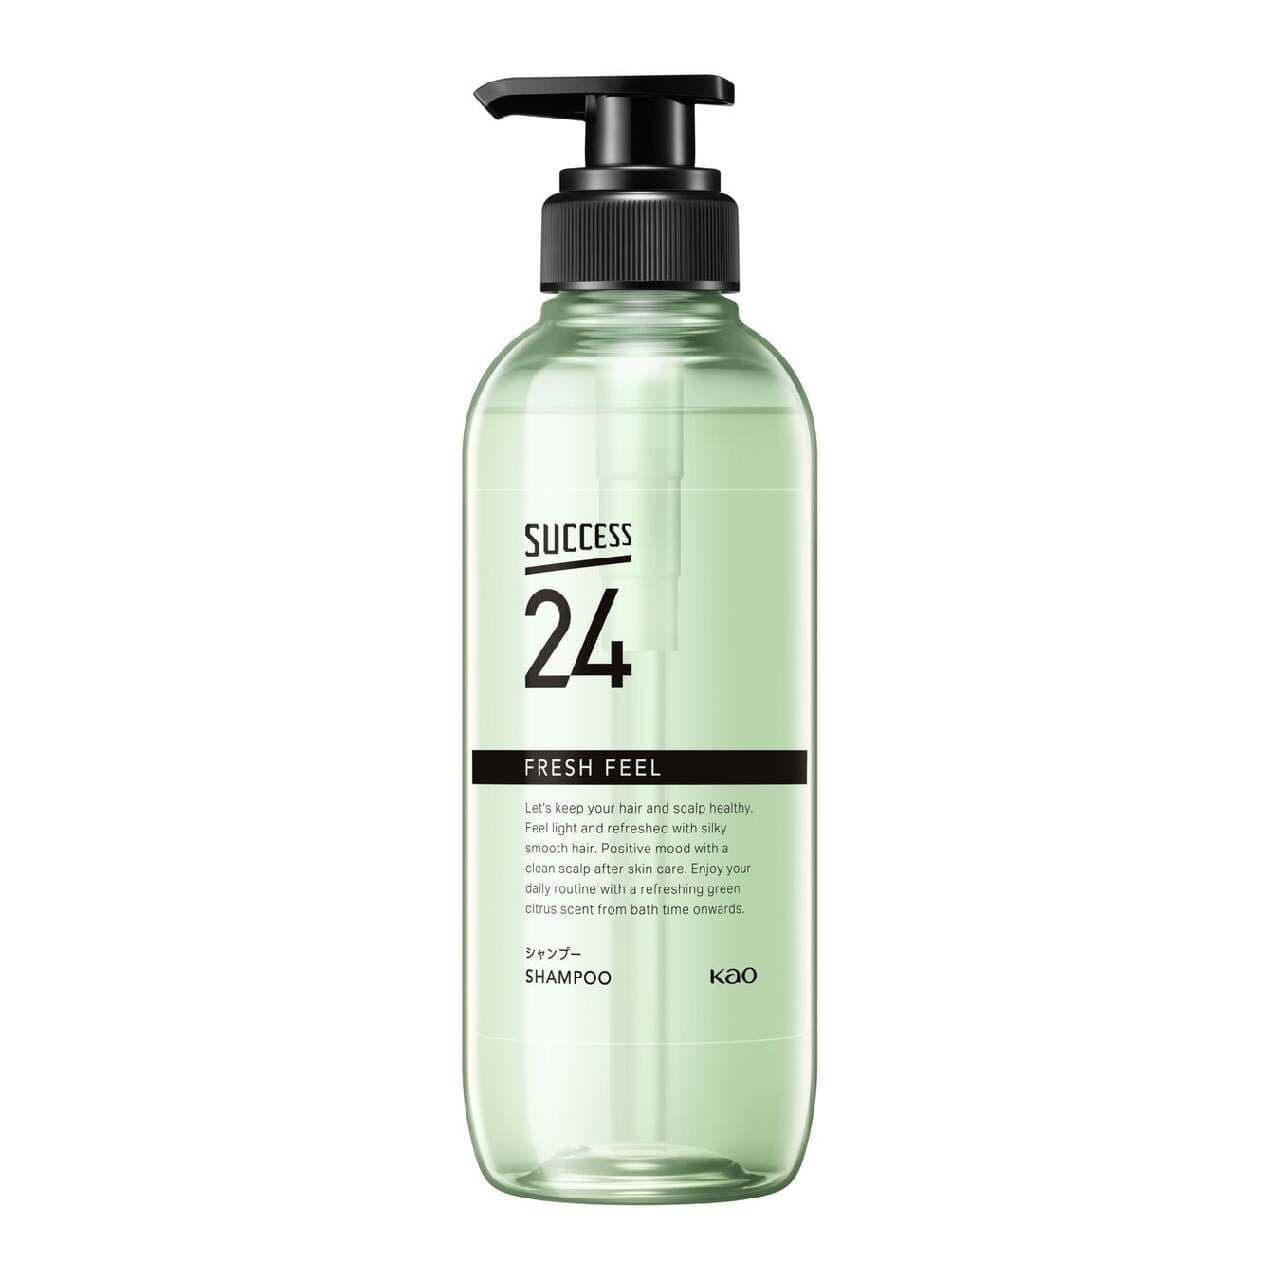 Kao men's grooming brand Success launches renewed shampoo and conditioner "Success 24" on April 27. Two types, Fresh Feel and Moist Feel, address scalp care for young men Image 3